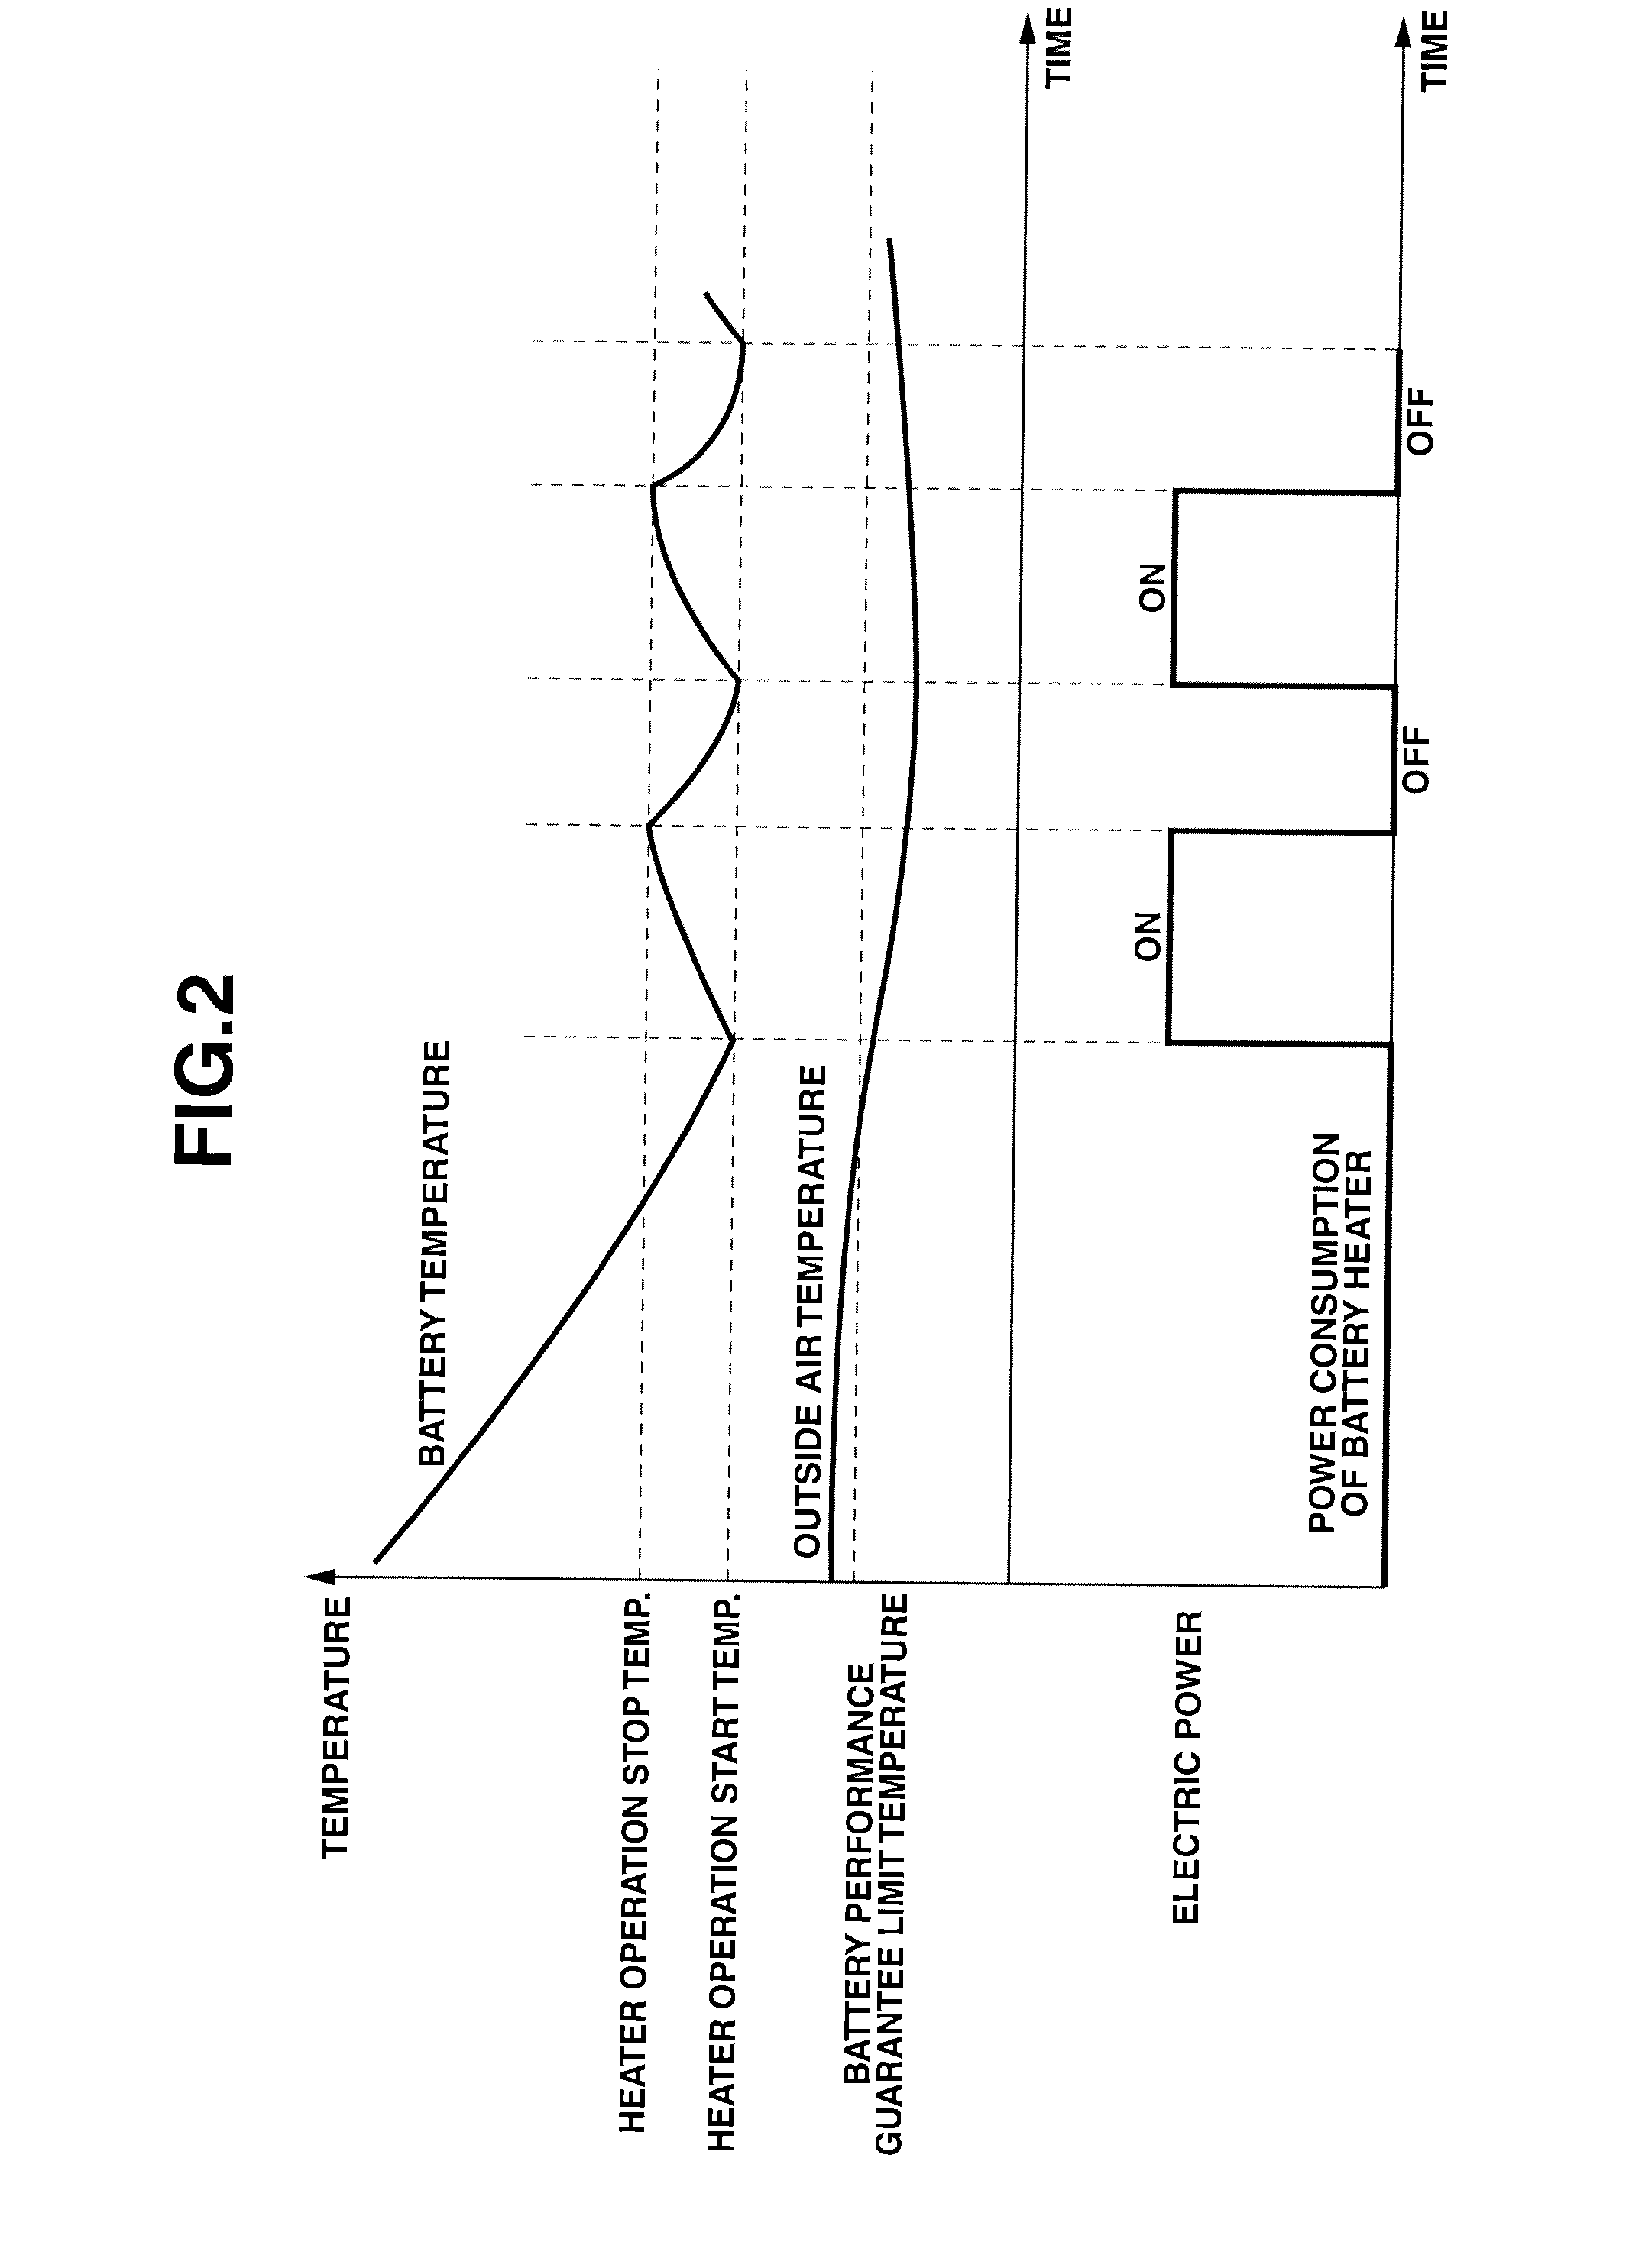 Charge control device for vehicle